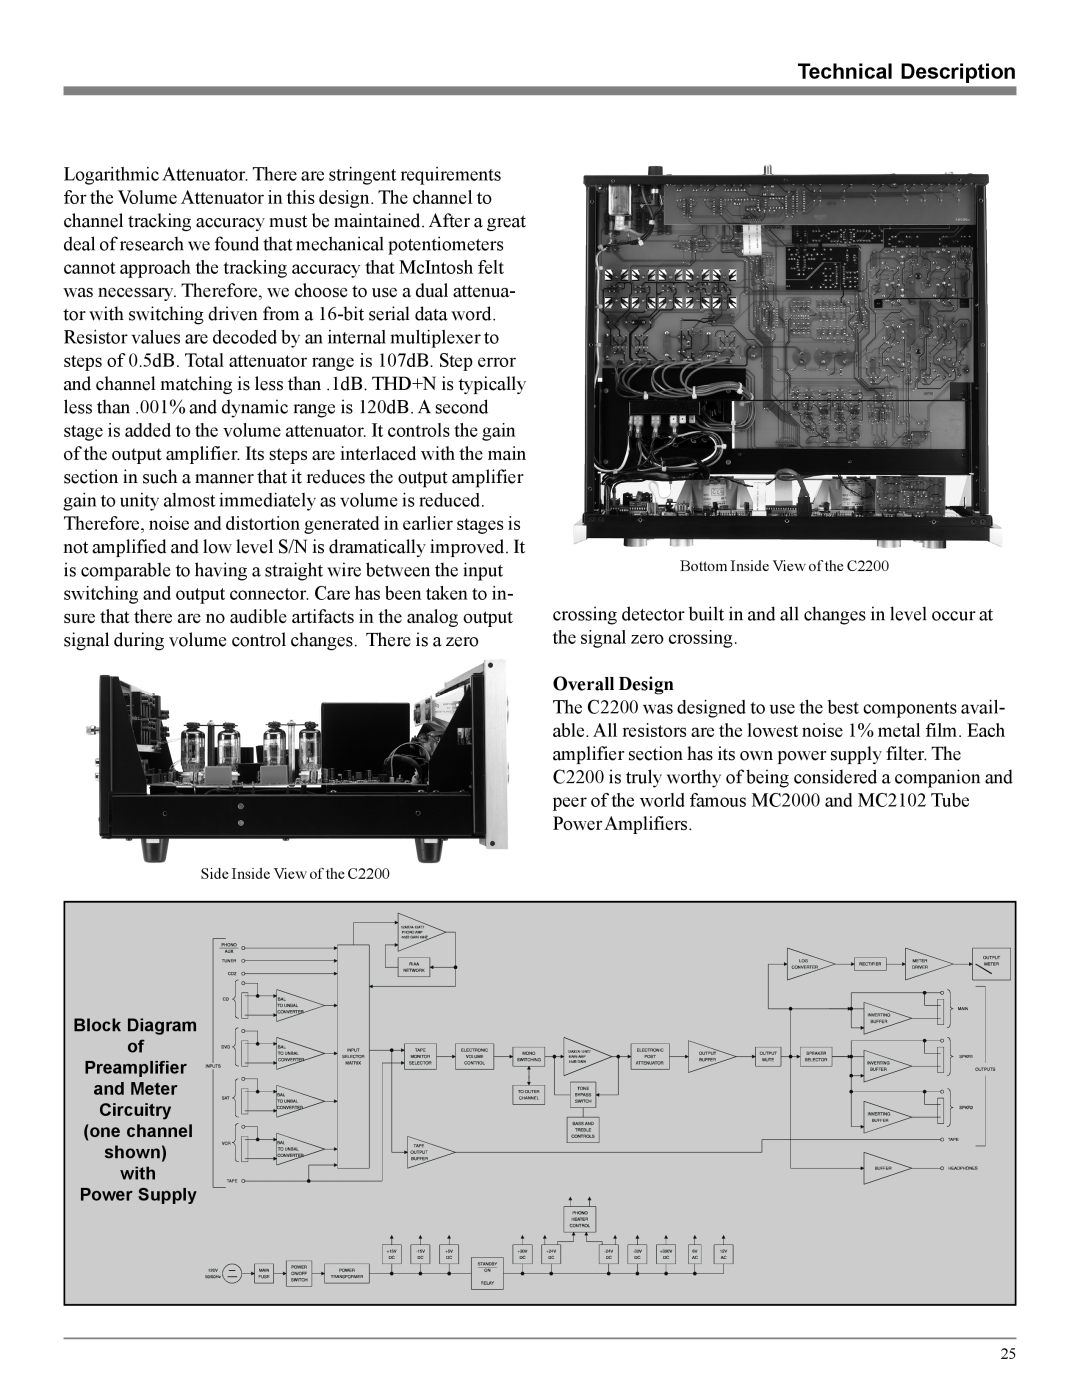 McIntosh C2200 Technical Description, Overall Design, Block Diagram of, Preamplifier and Meter Circuitry one channel 